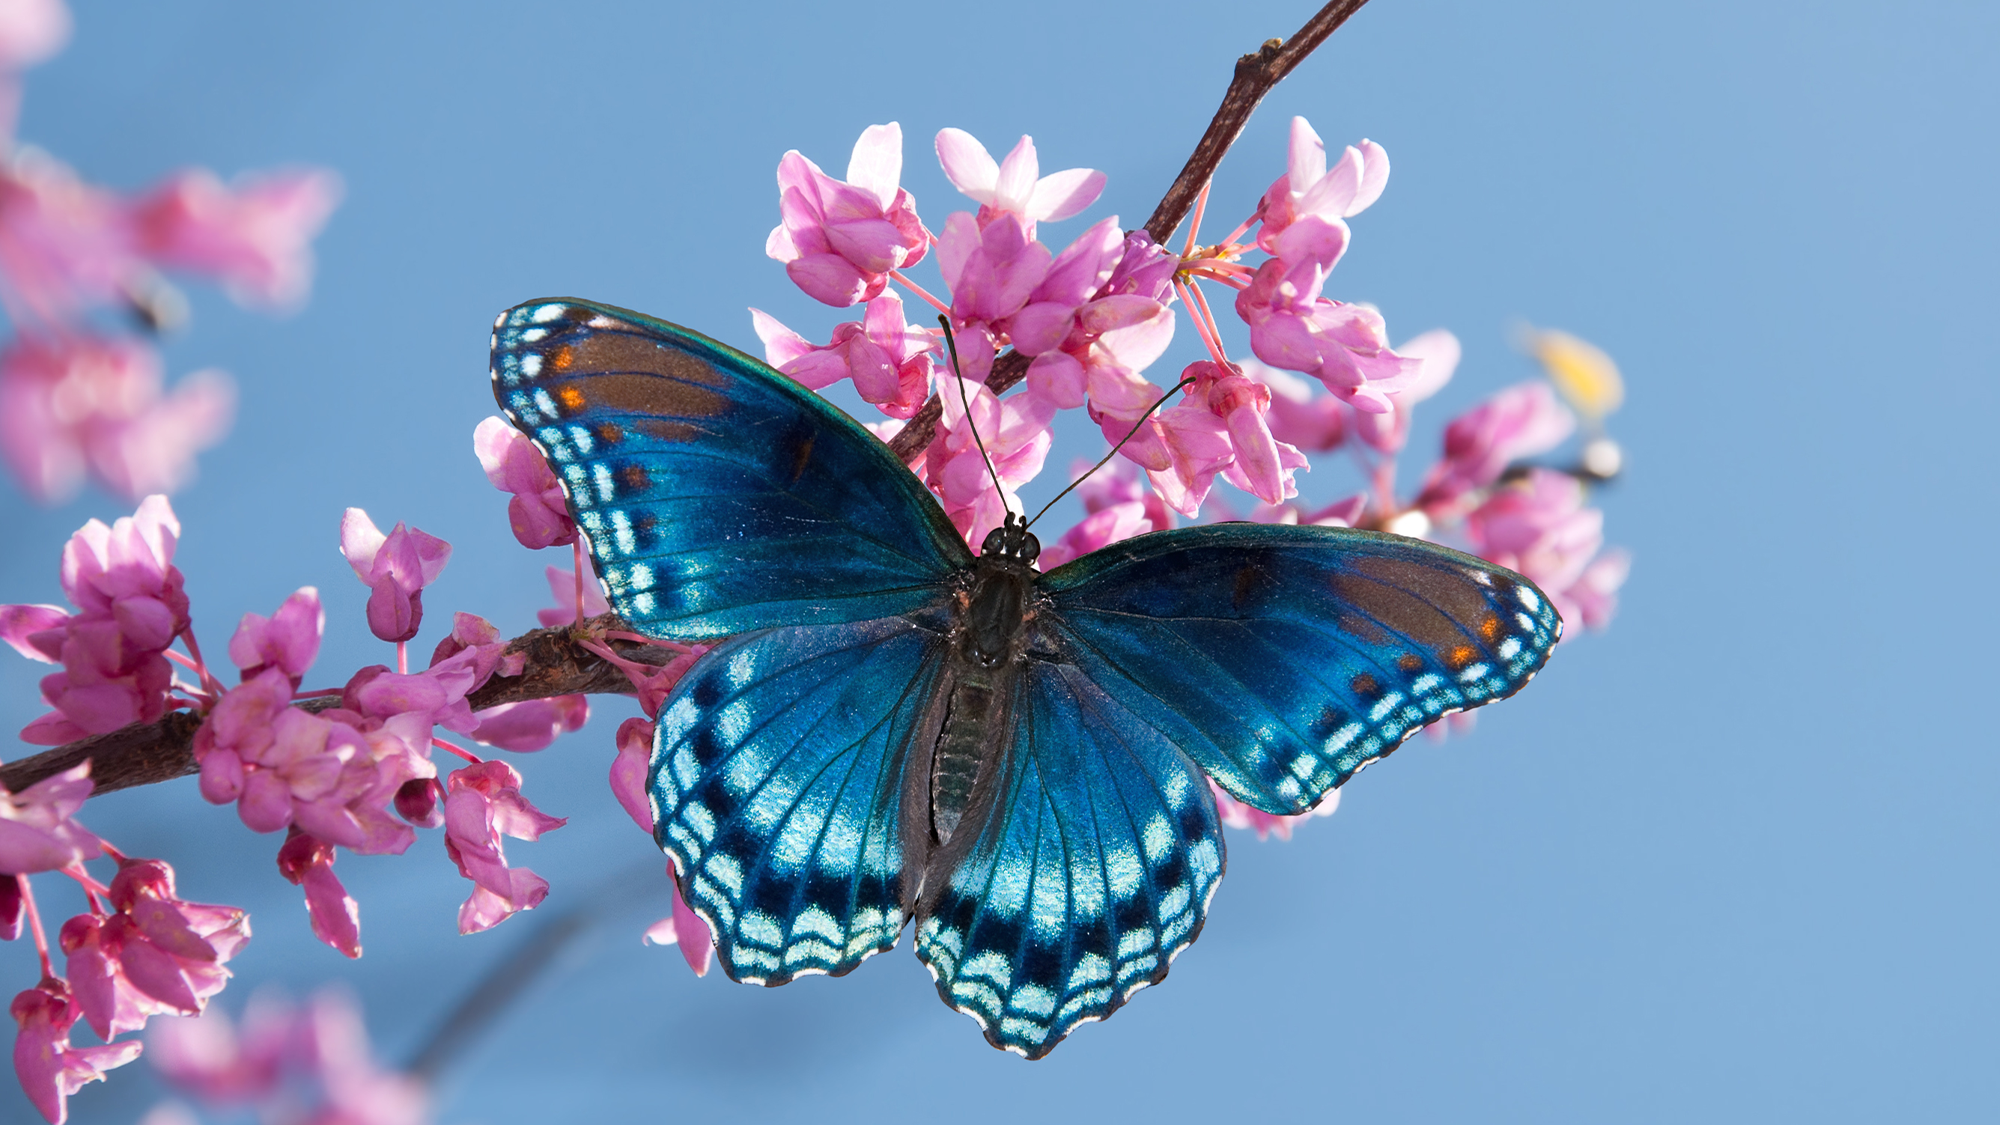 A blue butterfly on a pink flowering plant.